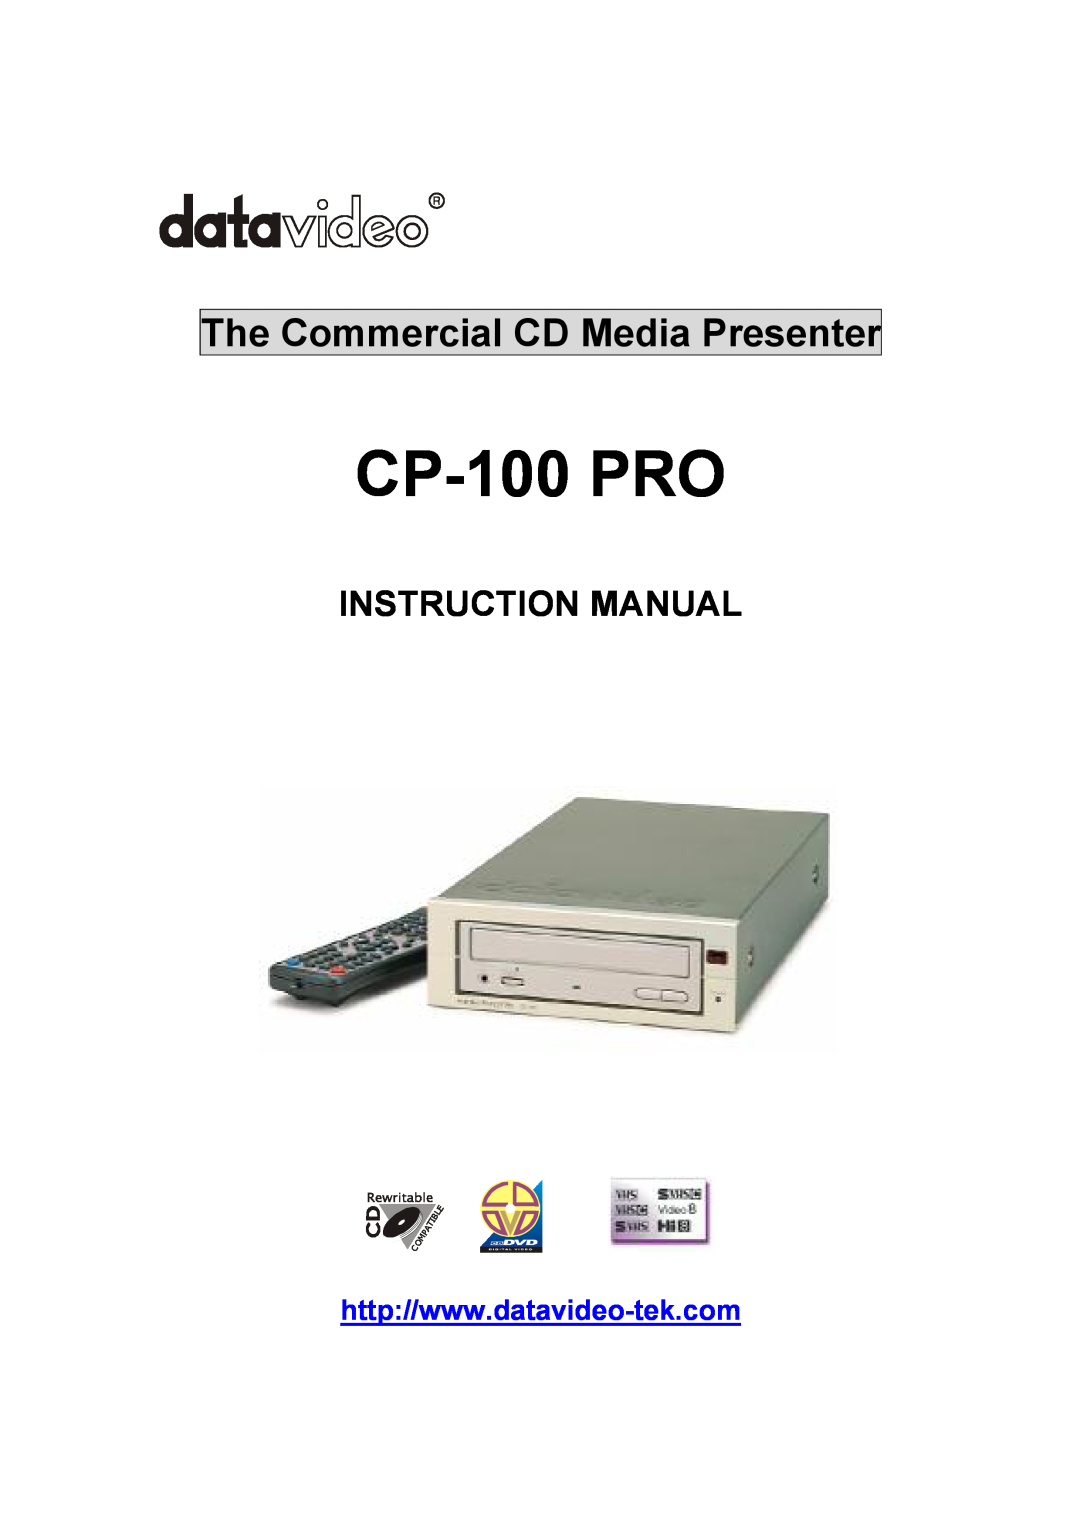 Datavideo CP-100 PRO instruction manual CP-100PRO, The Commercial CD Media Presenter 